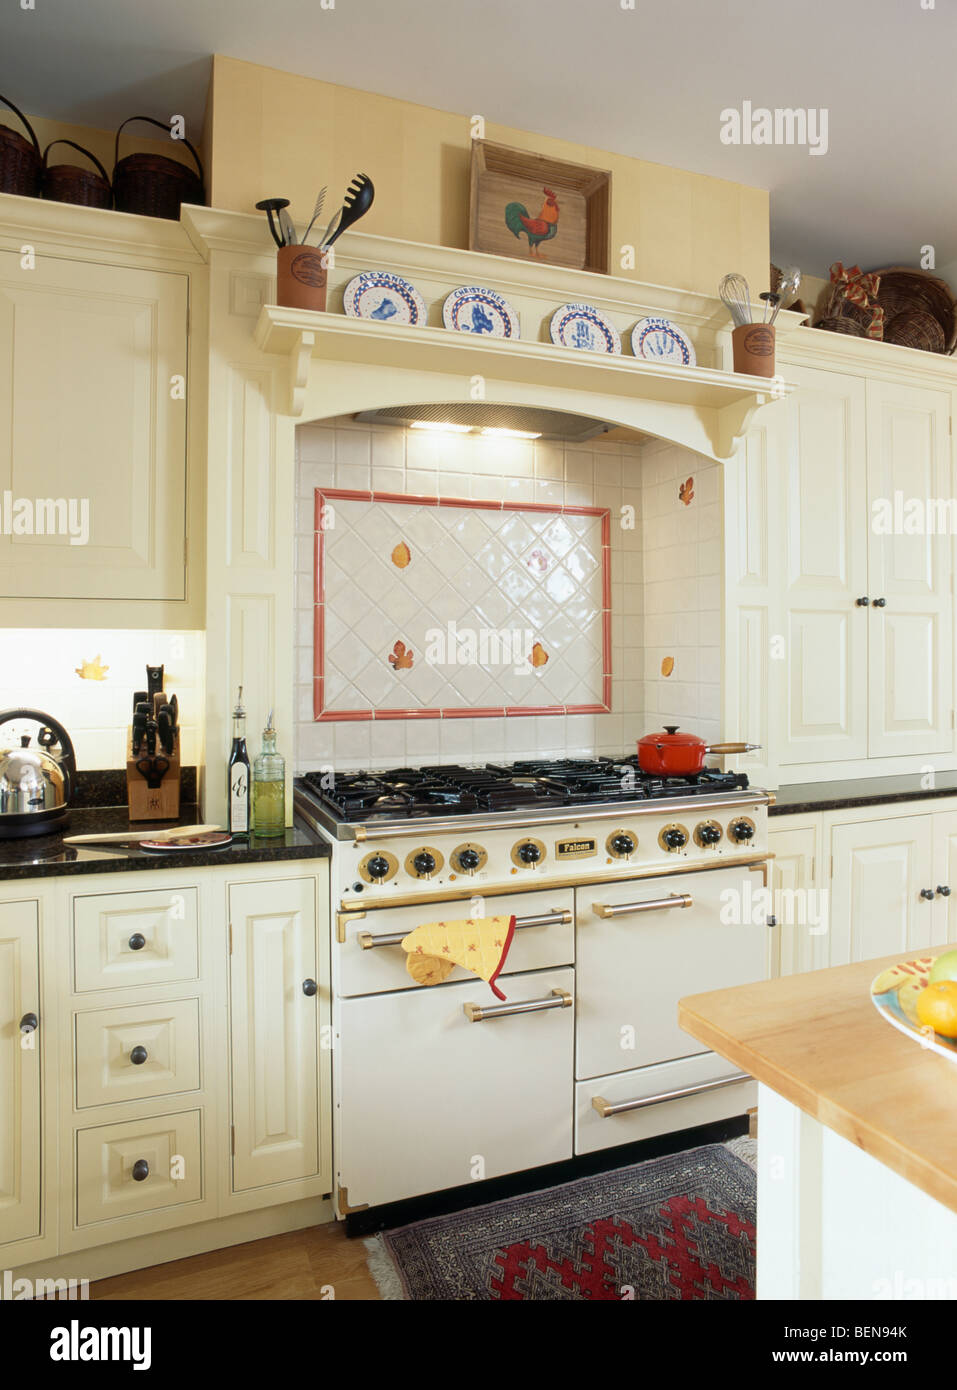 White and red wall tiles above white range oven in traditional white kitchen Stock Photo